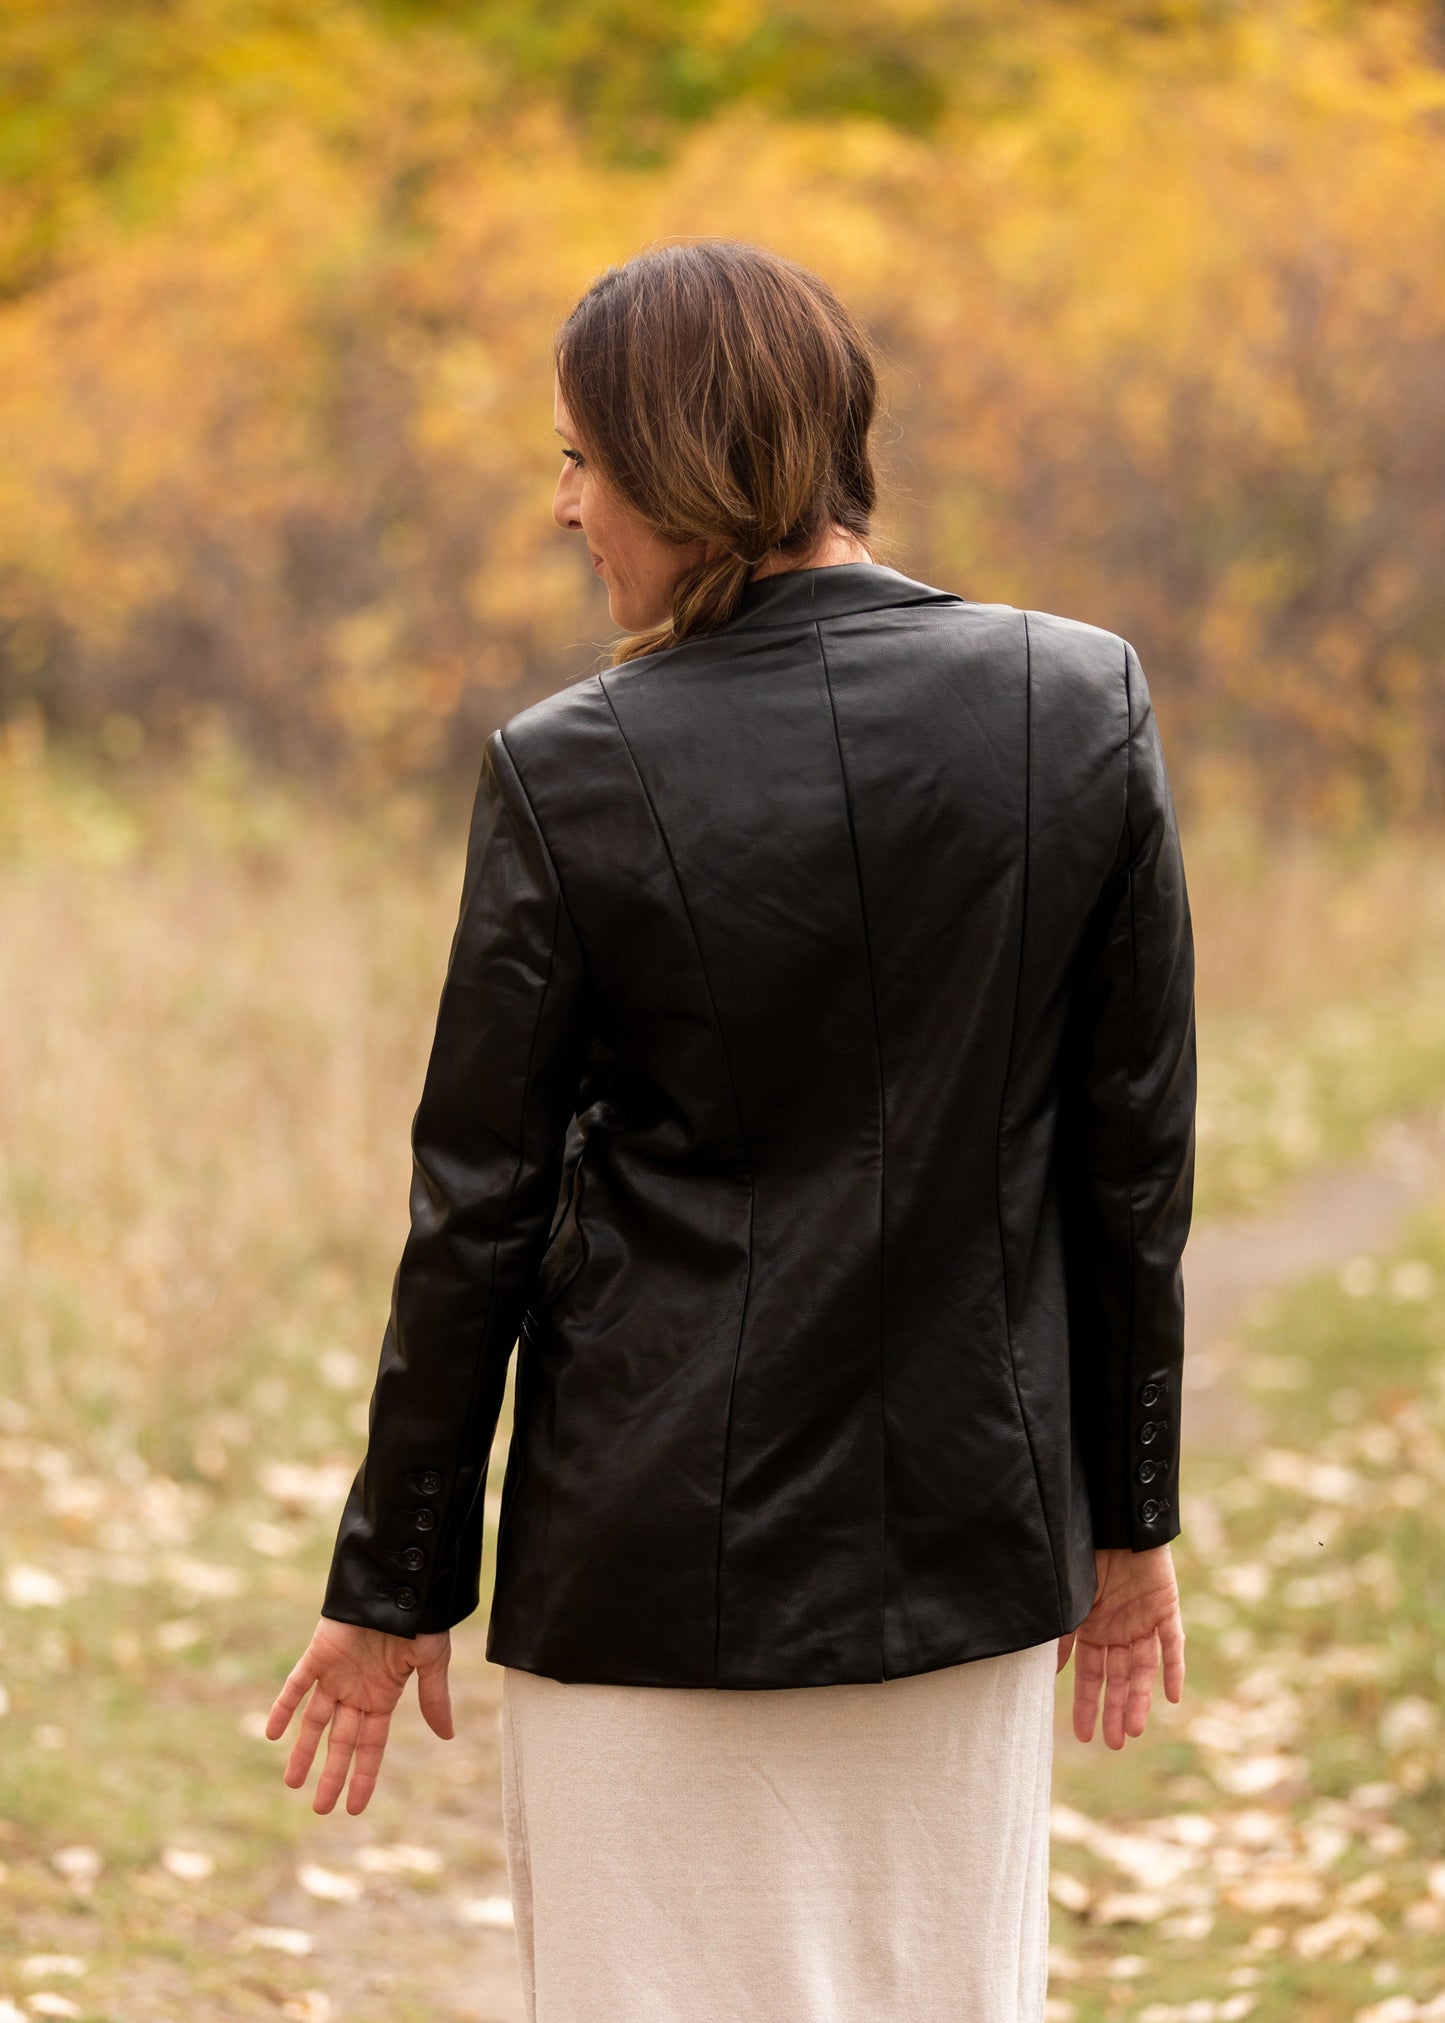 The Sandelle Faux Leather Blazer is a closet must-have! It is designed in a soft and supple vegan black leather fabric for elevated style. It has a one button closure in the center, a classic lapel collar, and it hits right below the hips for added modesty. There are functional front pockets at the waist to hold your essentials. The fit of this blazer is relaxed yet classy perfect over a dress or skirt and sweater! You will have so many outfit options with just this one layer! 